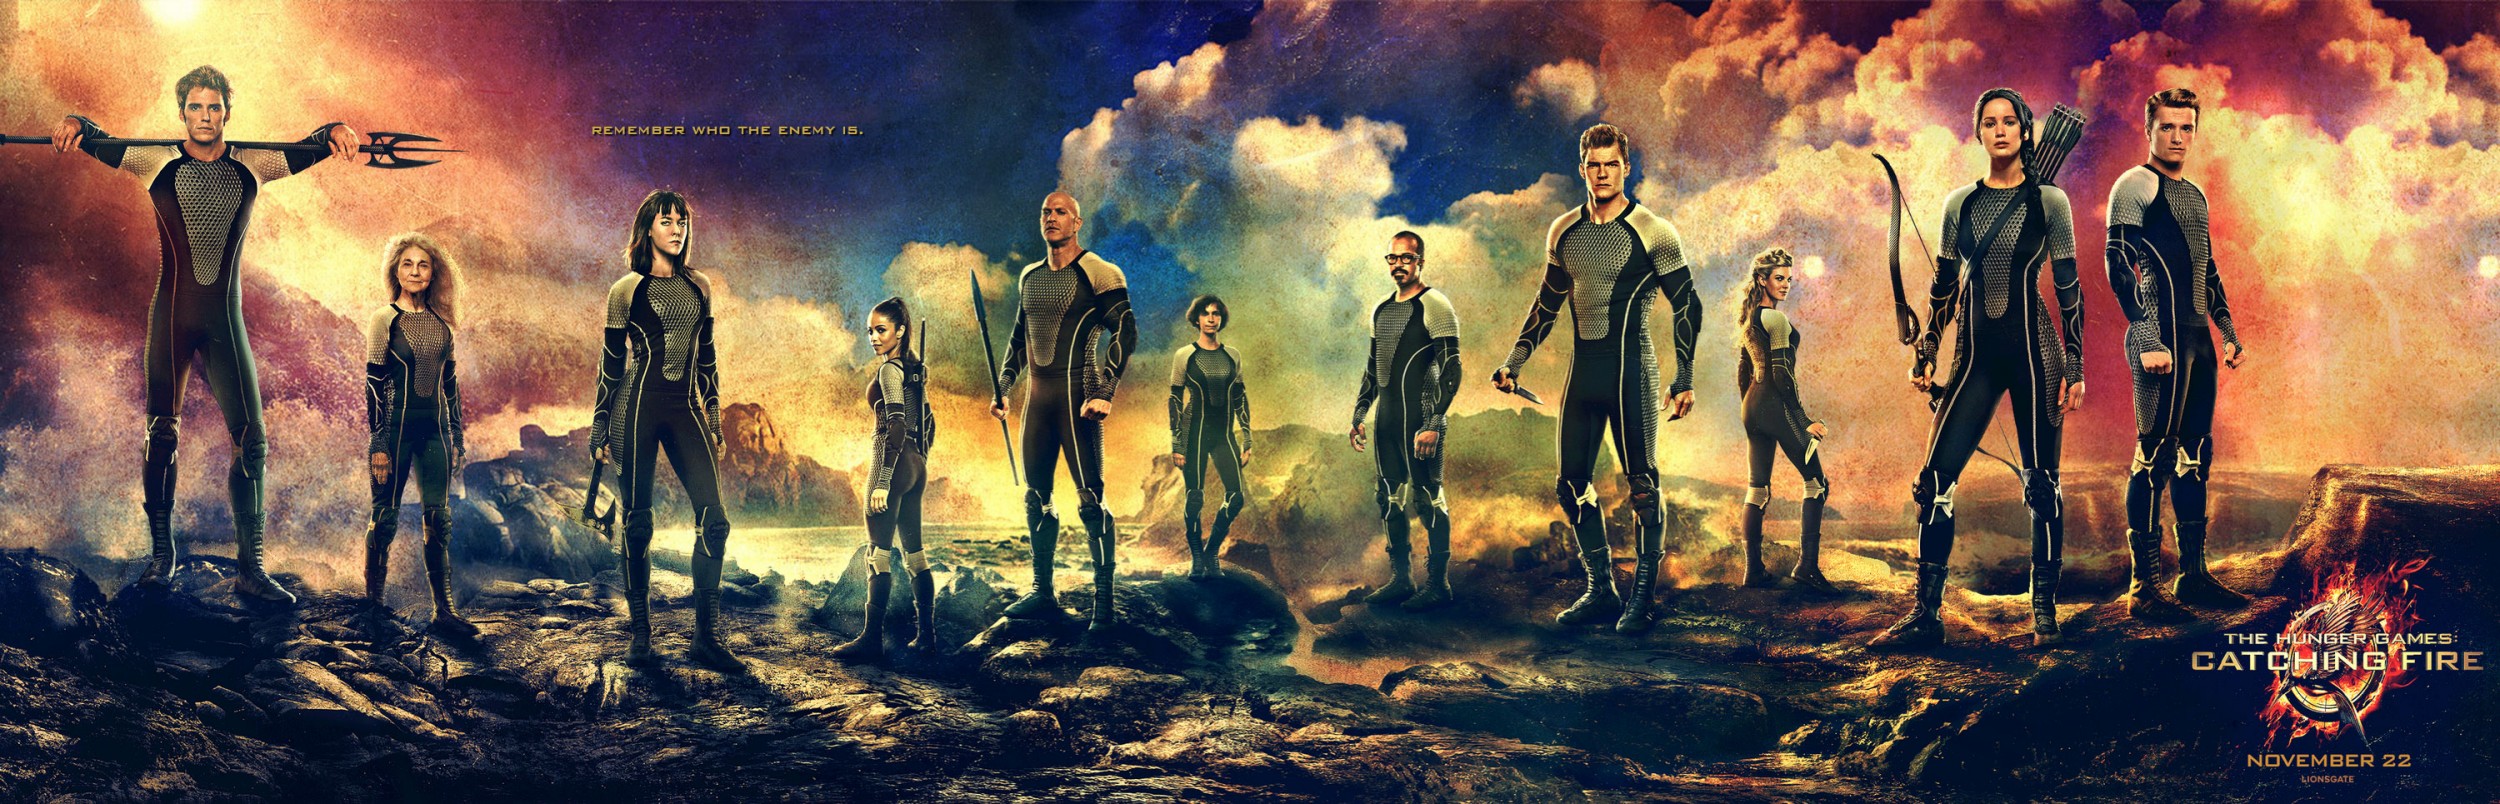 Mega Sized Movie Poster Image for The Hunger Games: Catching Fire (#30 of 33)